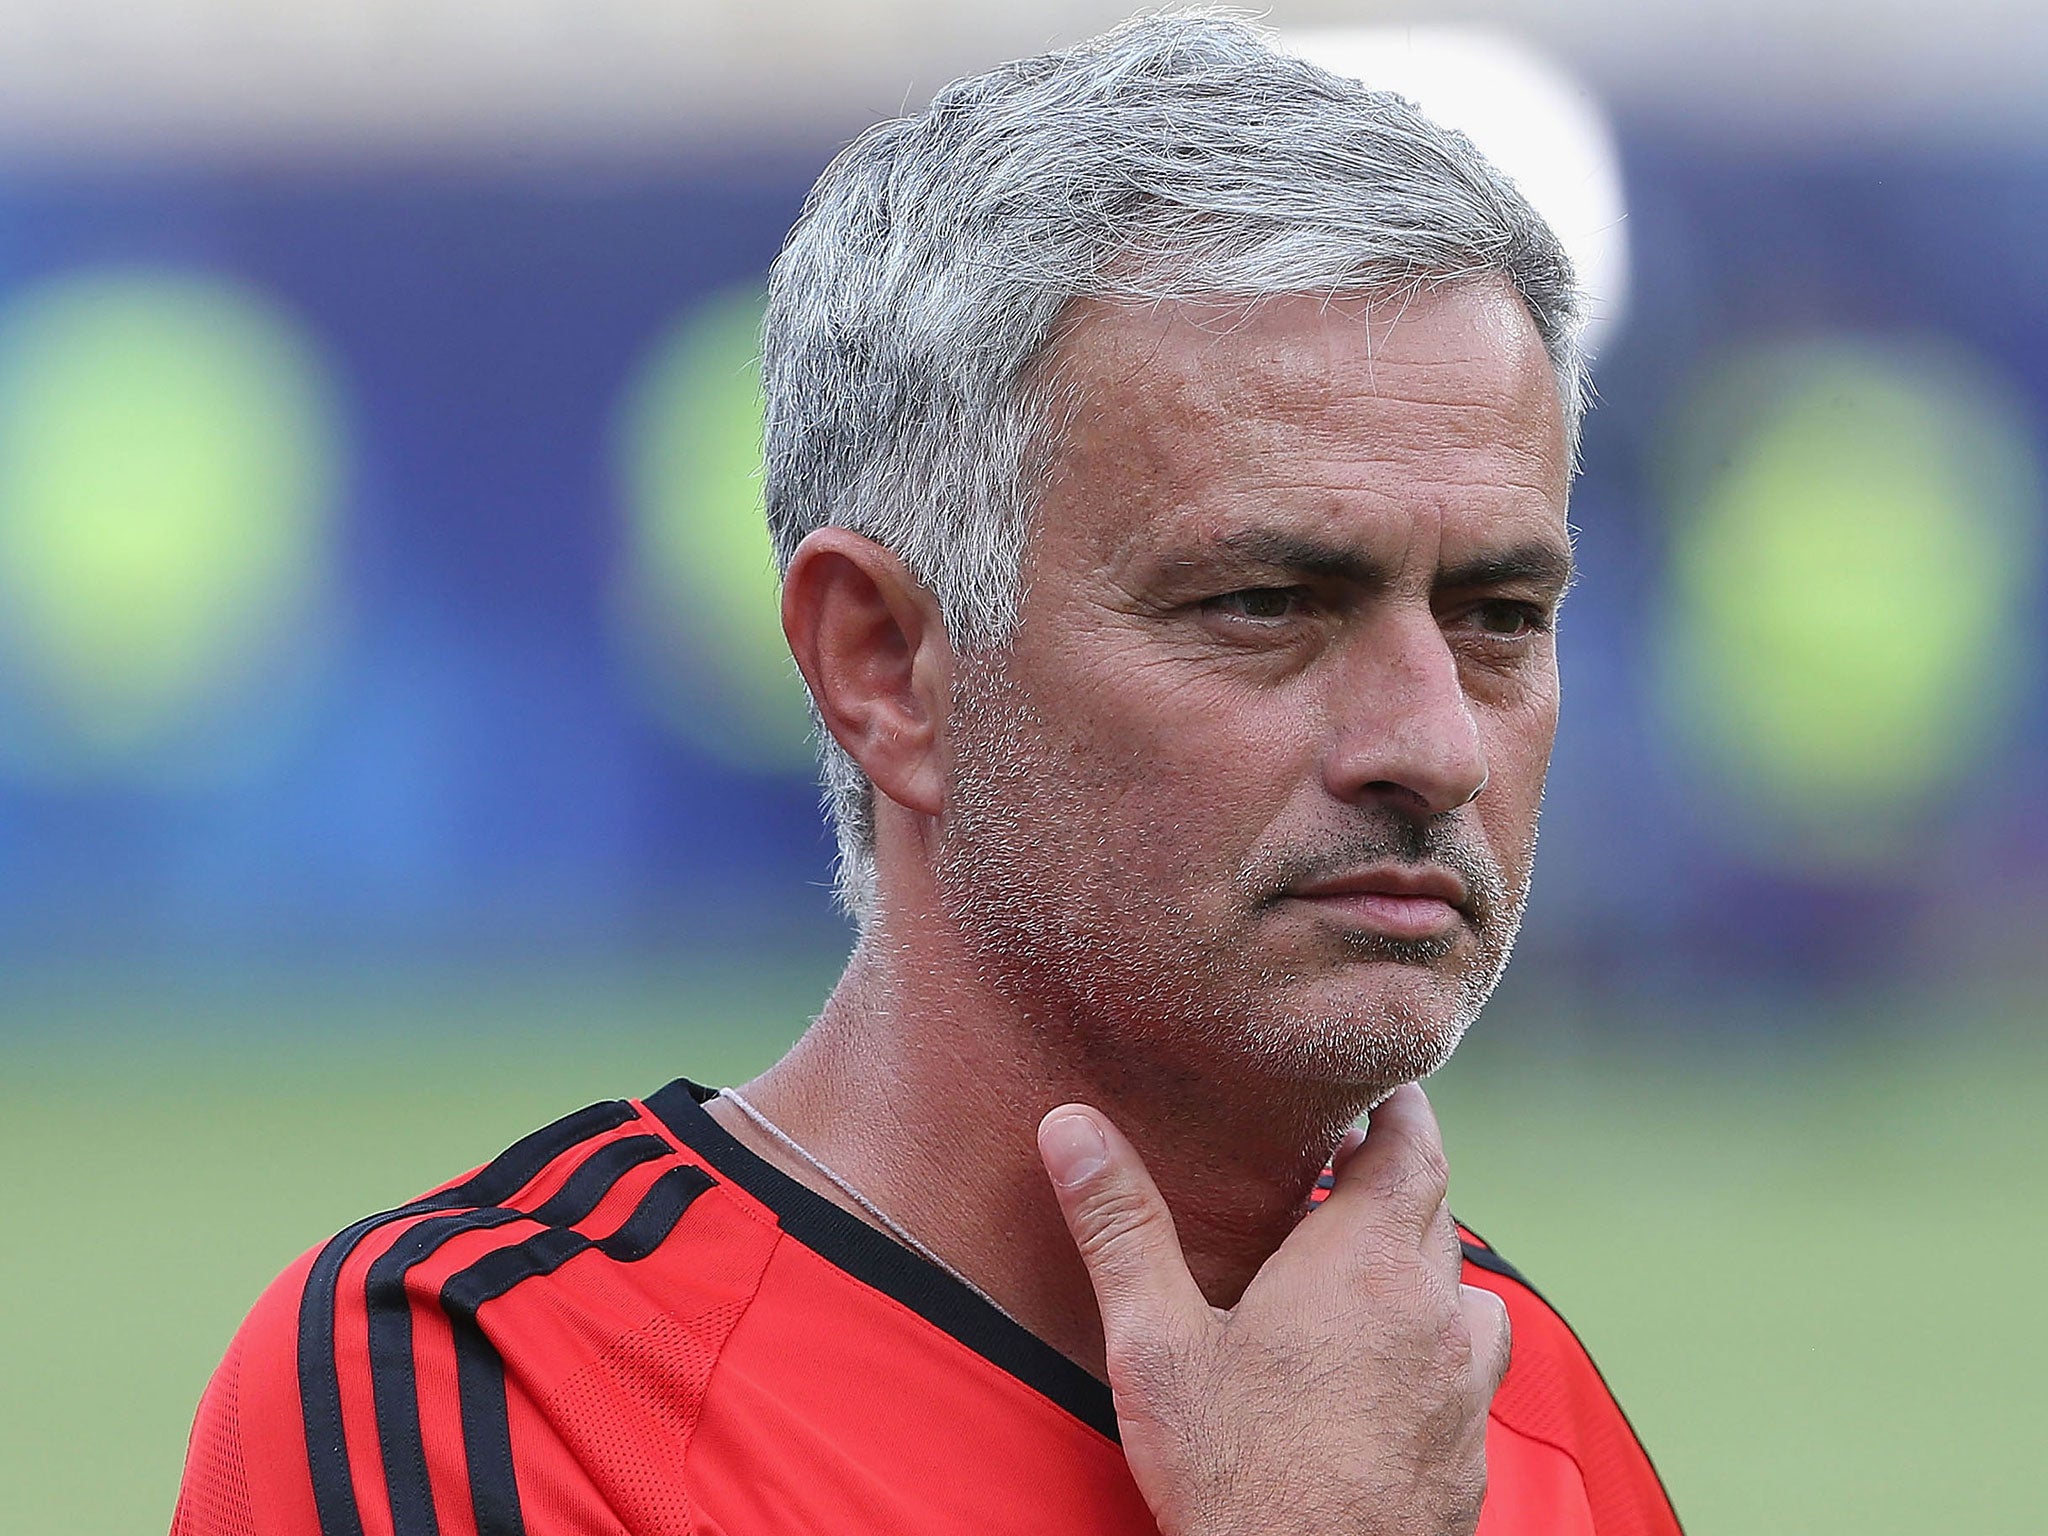 Jose Mourinho said he knows Manchester United better now after a season at the club